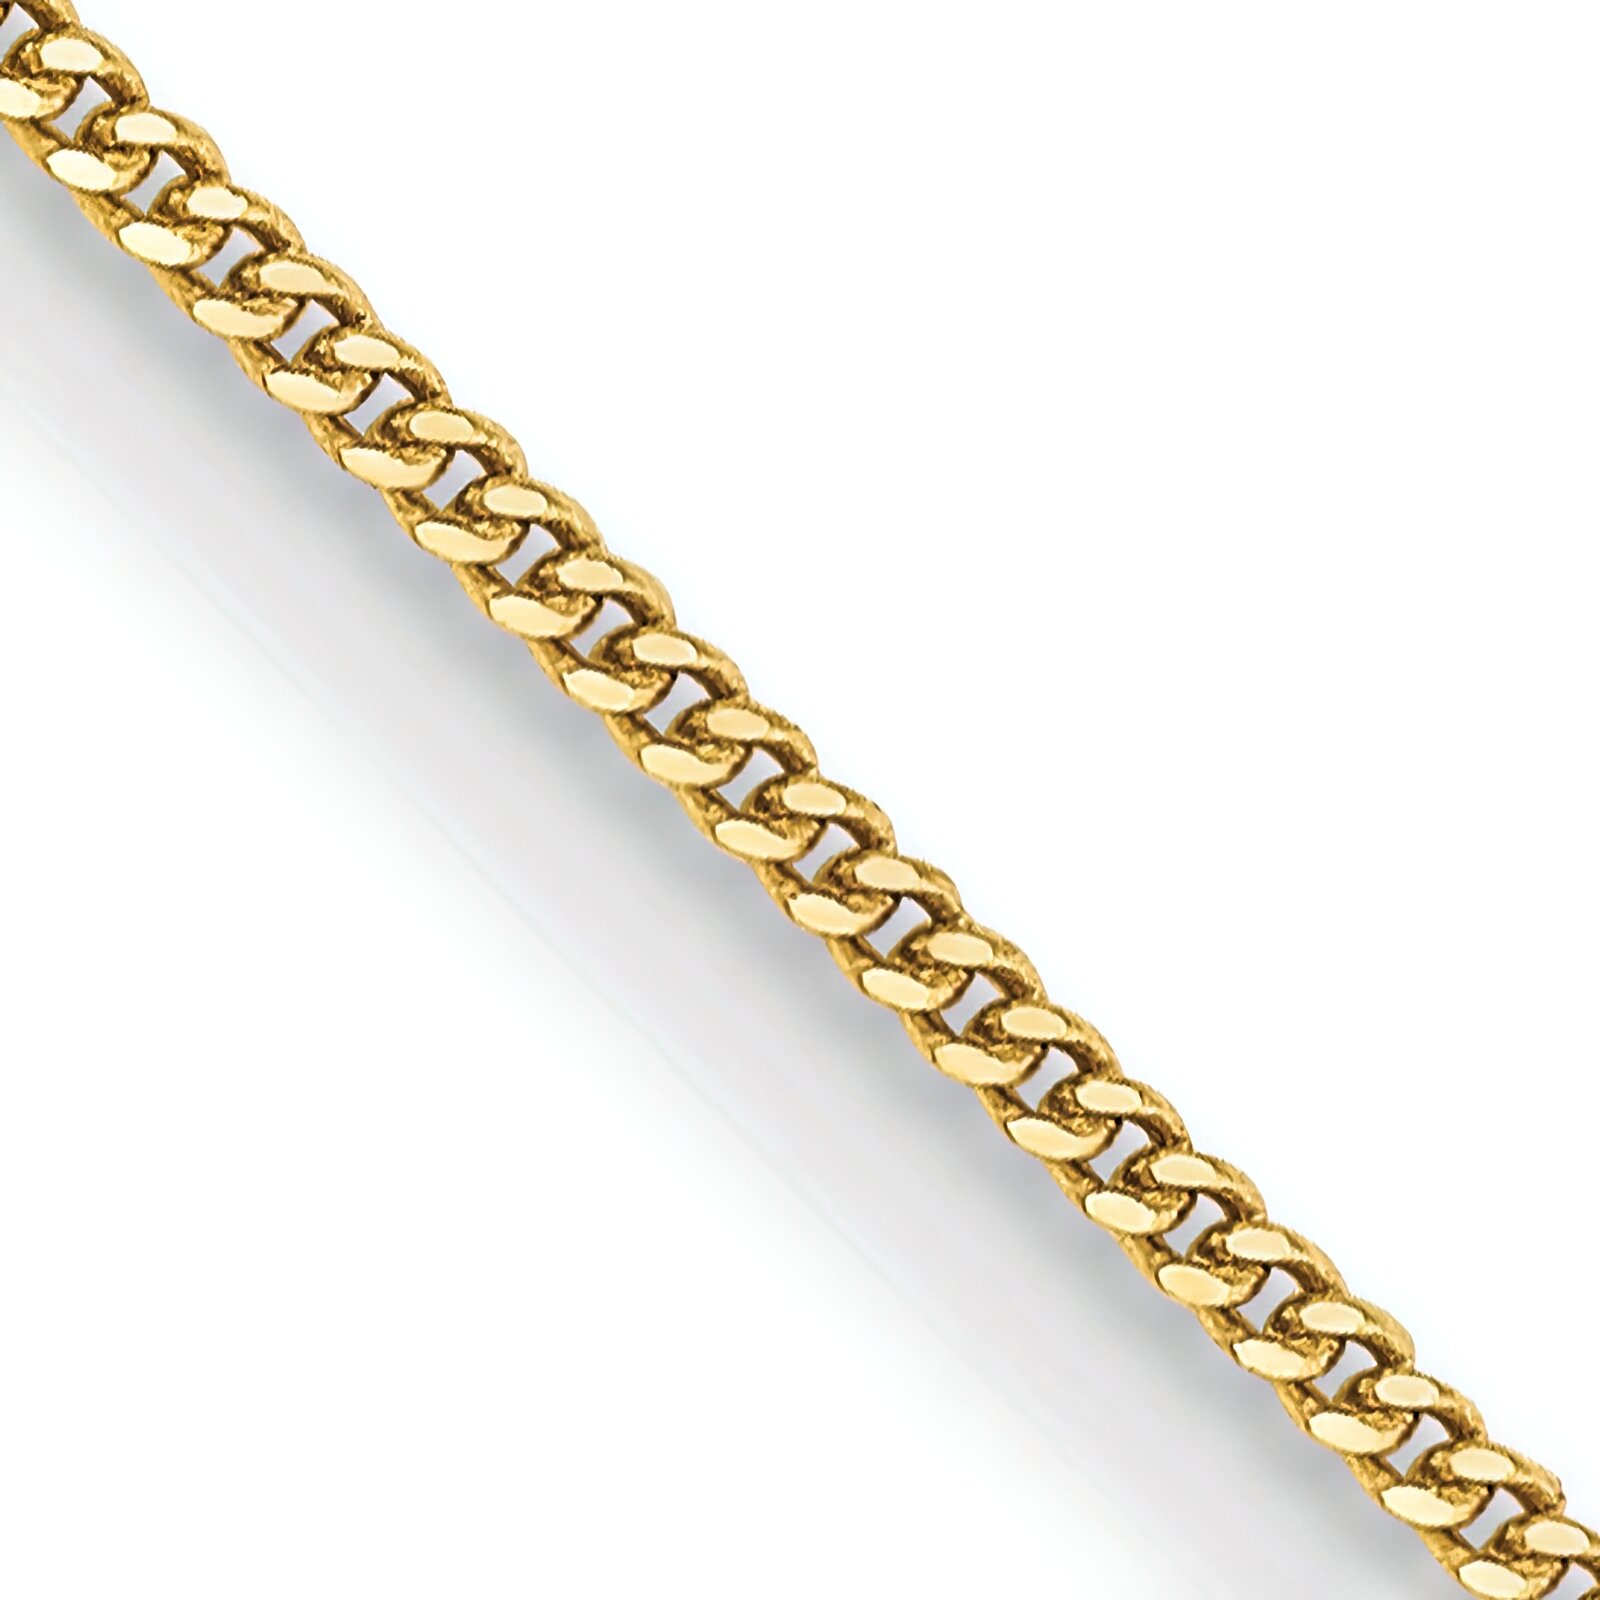 Findingking 14K Gold .9mm Curb Charm Chain Necklace Jewelry 16"